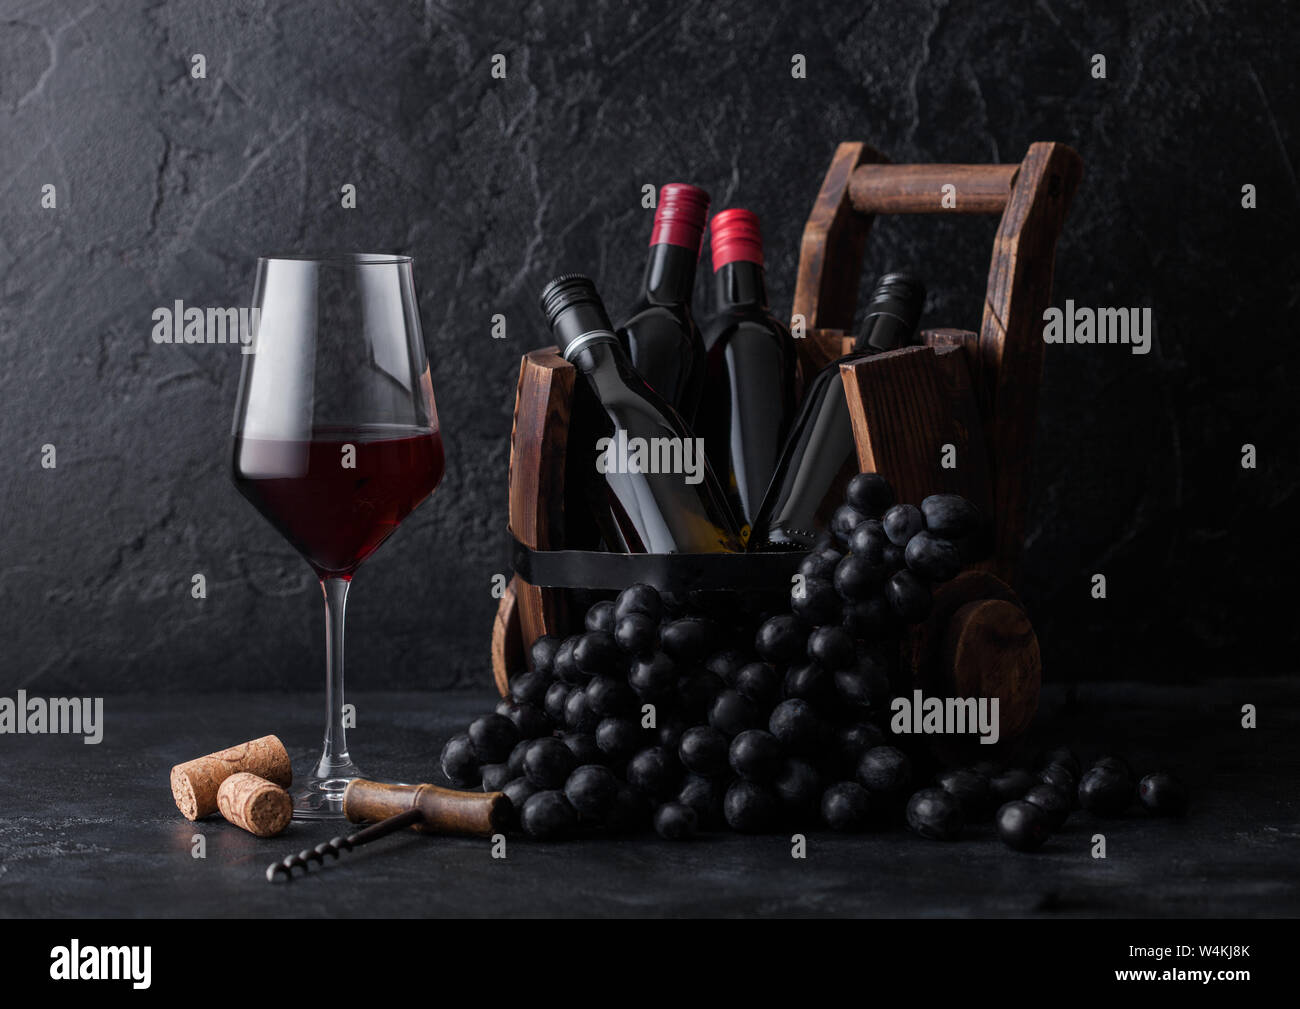 Elegant glass of red wine with dark grapes and mini bottles of wine inside vintage wooden barrel on black stone background. Stock Photo